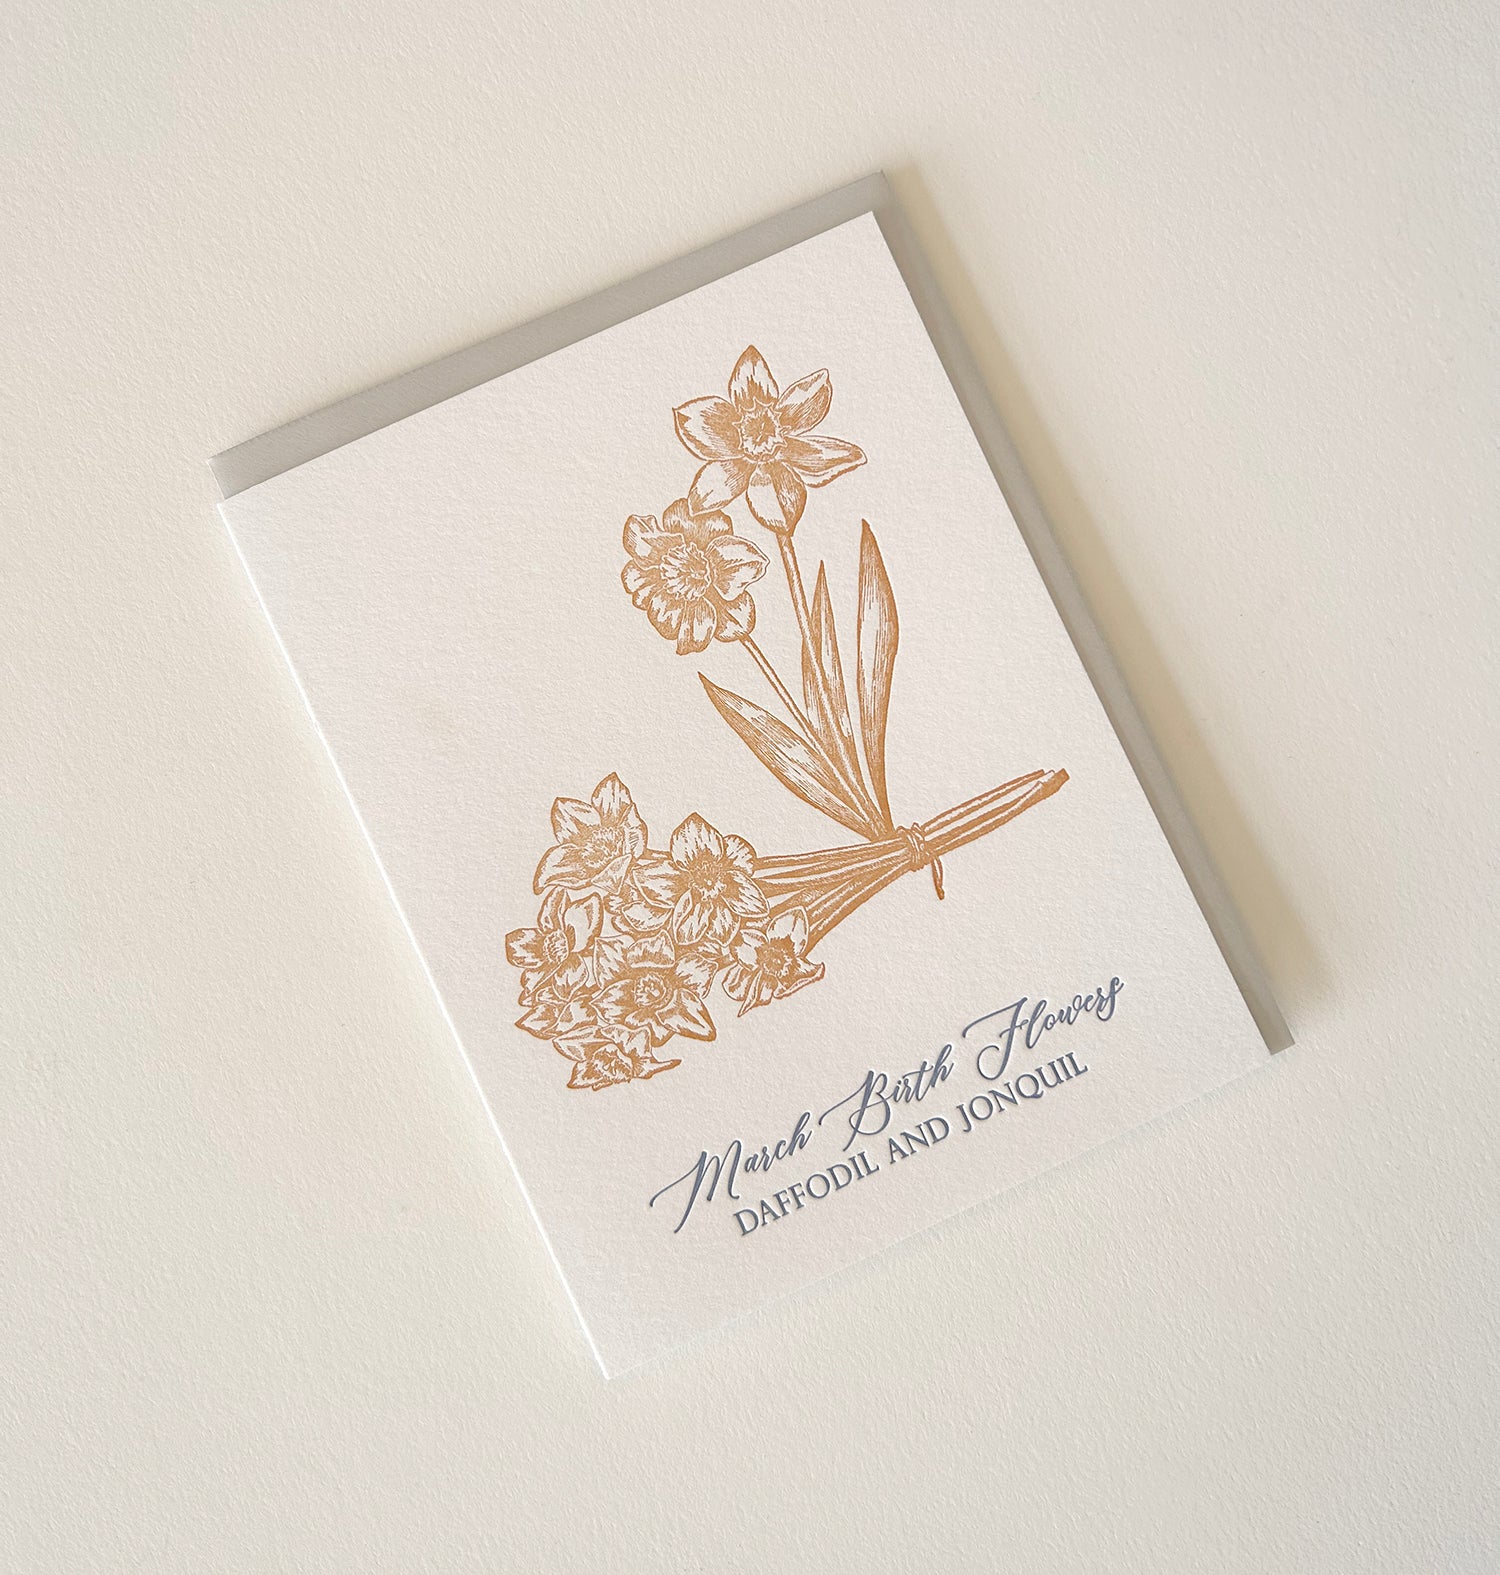 Letterpress birthday card with florals that says "March birth flowers daffodil and jonquil" by Rust Belt Love